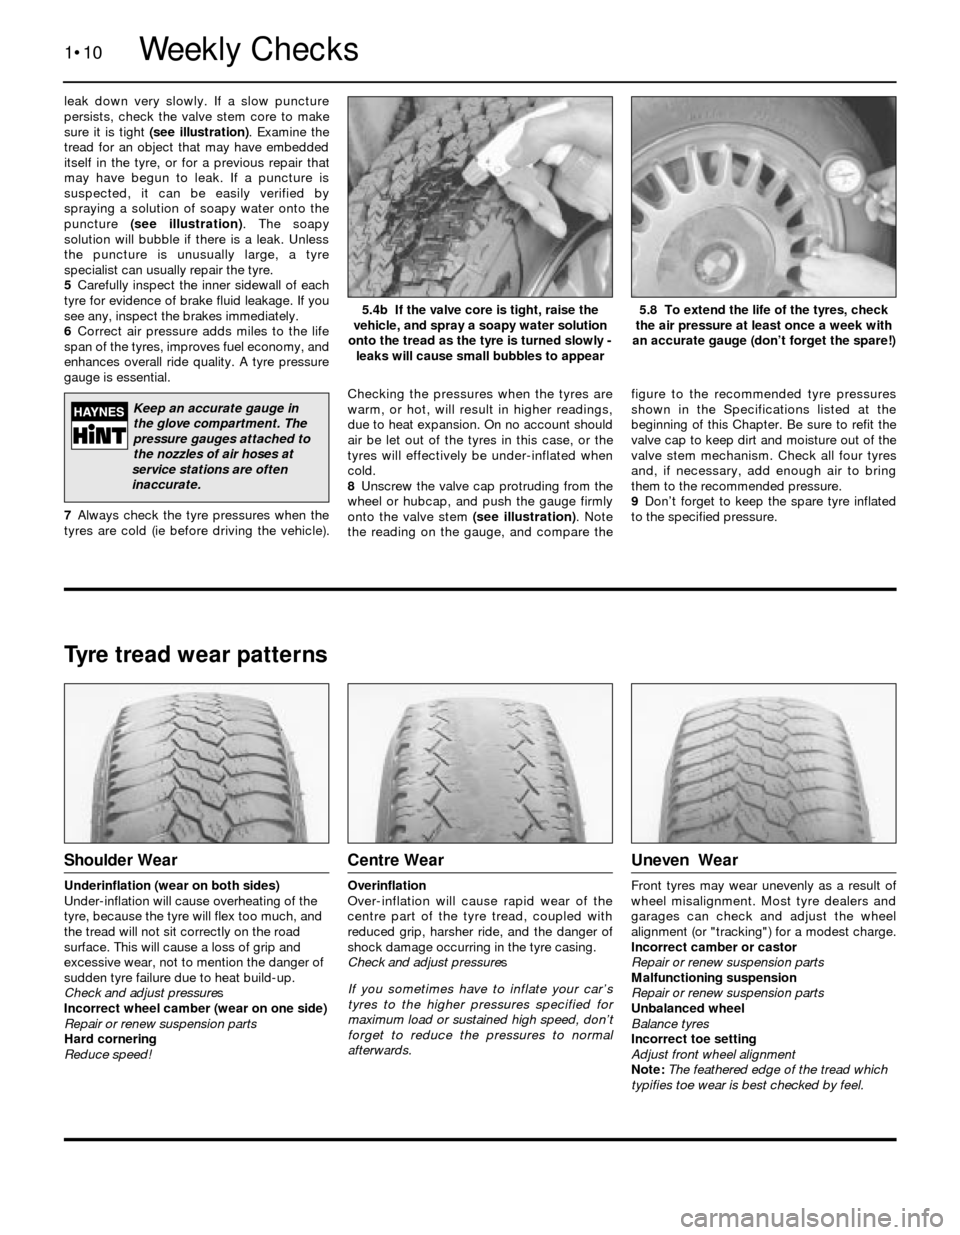 BMW 3 SERIES 1986 E30 Workshop Manual leak down very slowly. If a slow puncture
persists, check the valve stem core to make
sure it is tight (see illustration). Examine the
tread for an object that may have embedded
itself in the tyre, or